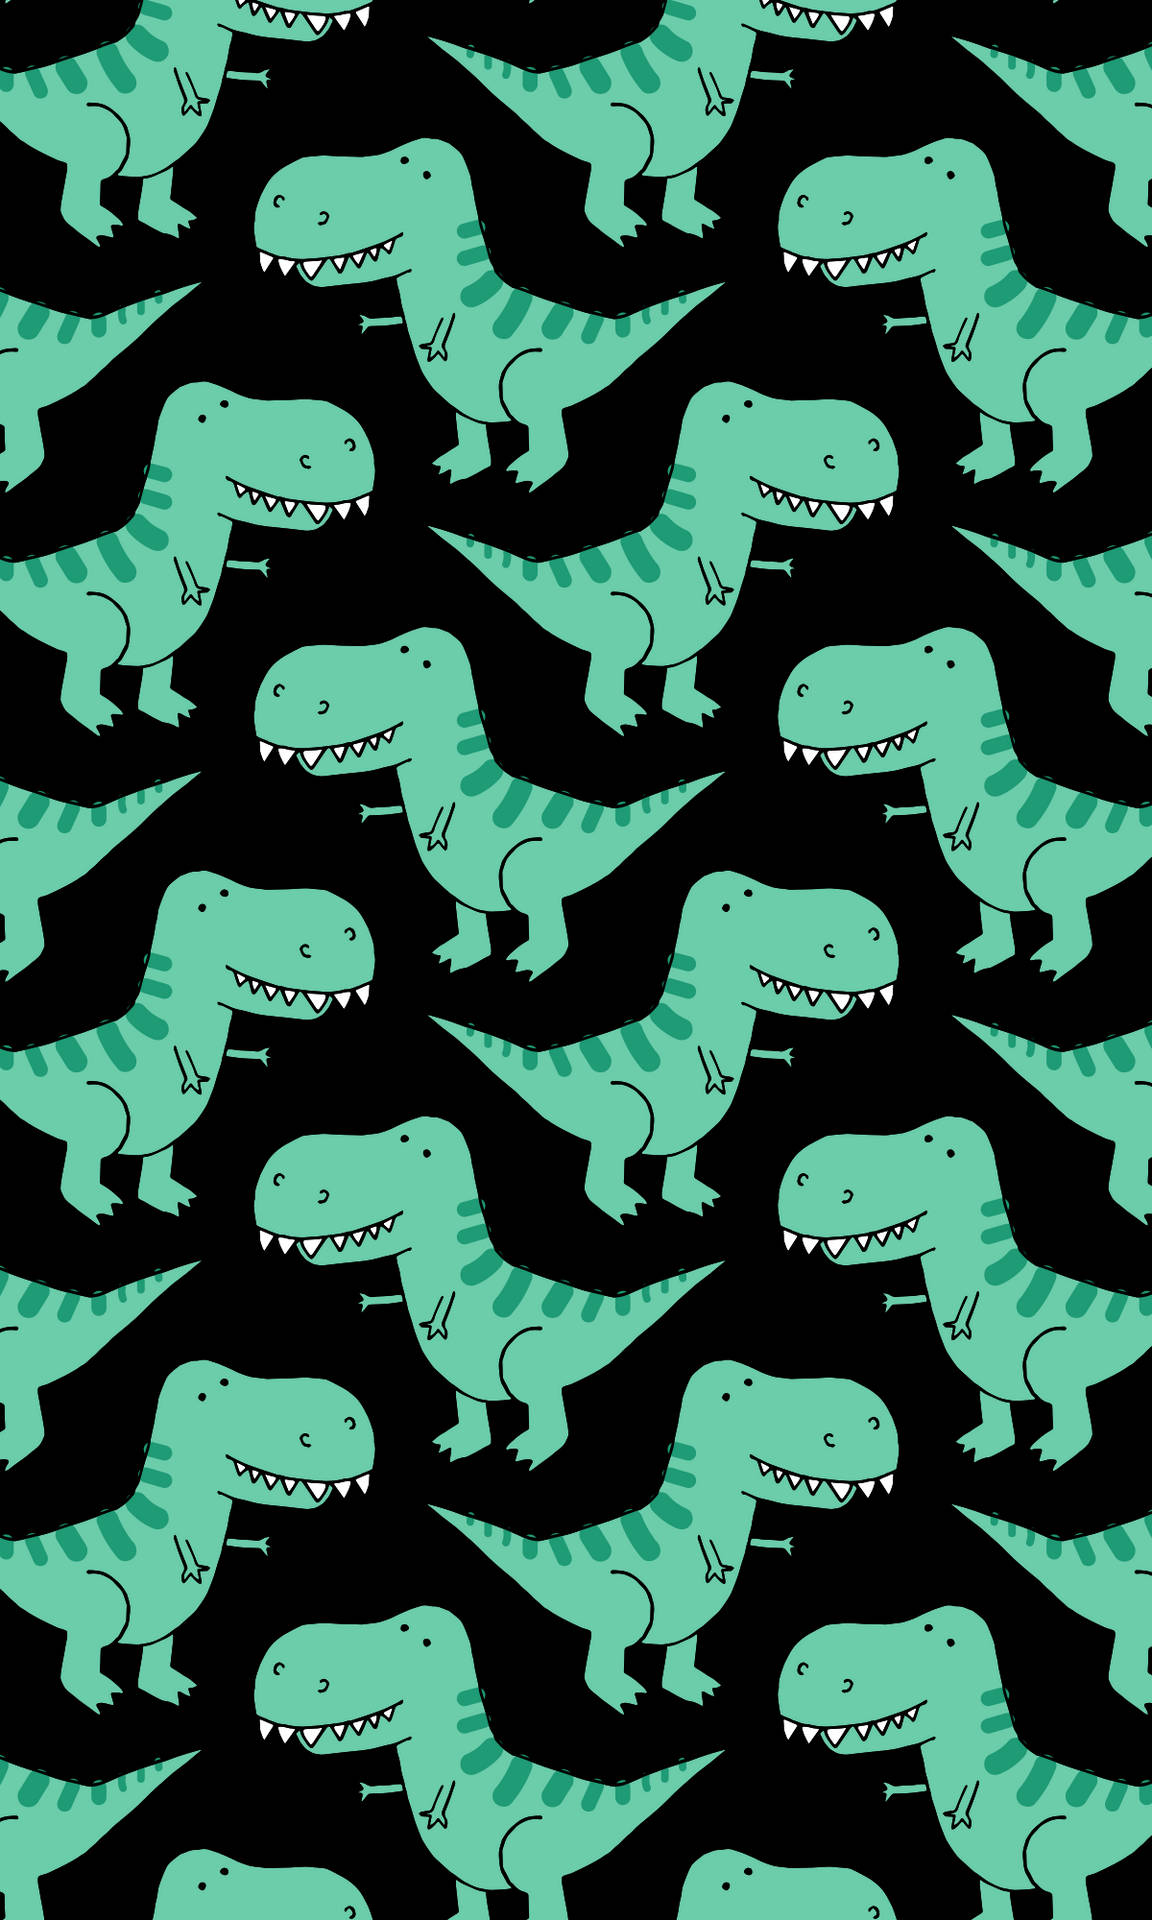 Bring color to your tech with this Cute Dinosaur iPhone Wallpaper Wallpaper